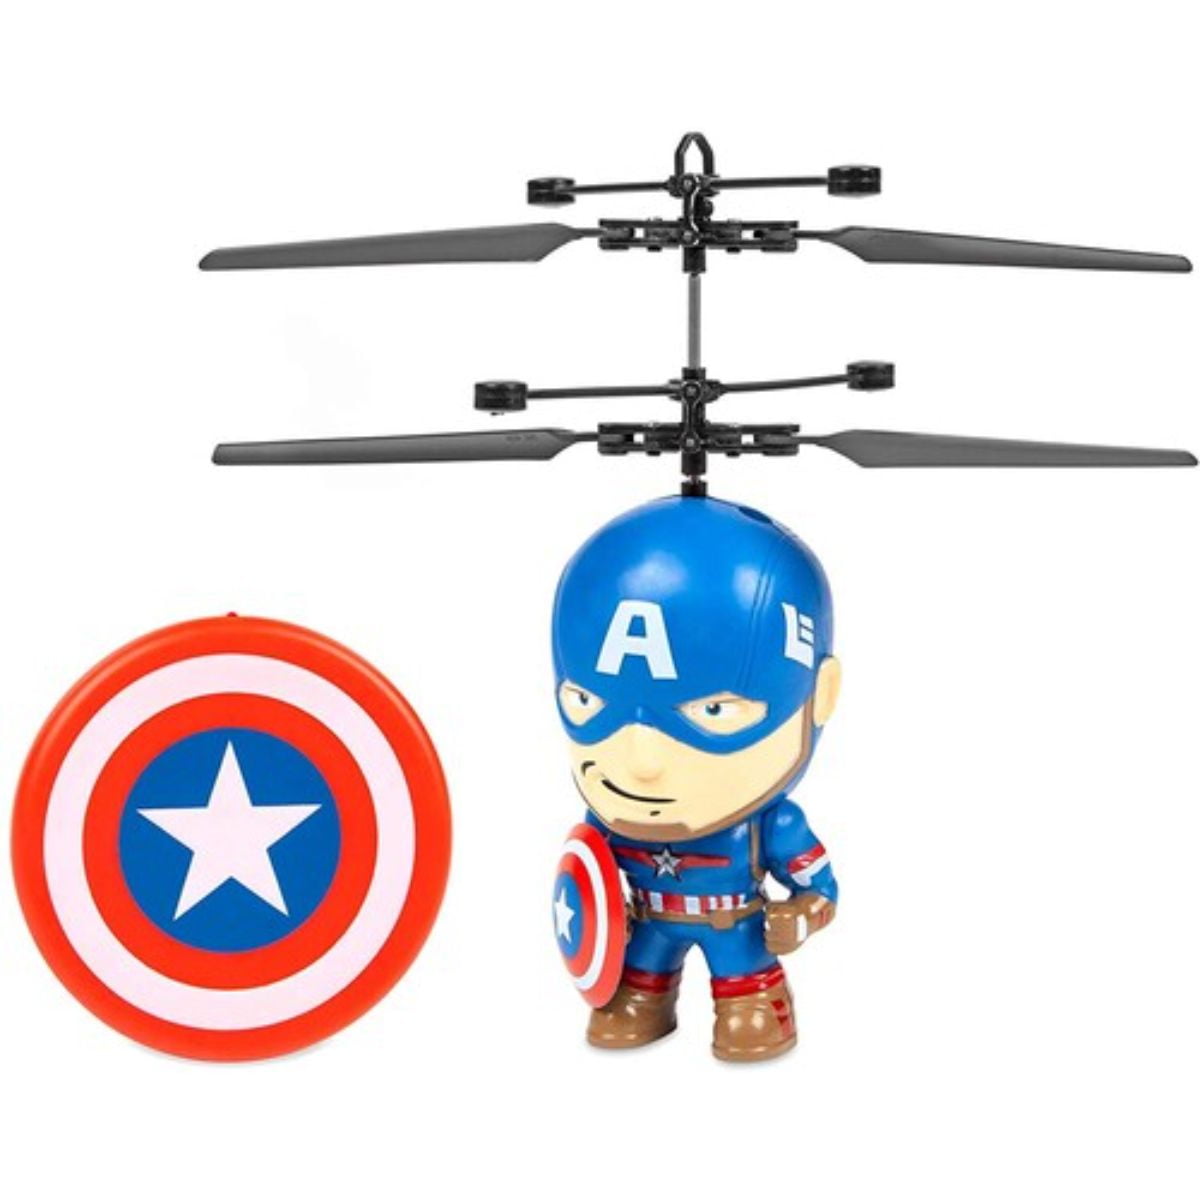 Flying Marvel Spiderman Marvel Vision Ironman Captain americahelicopter Toy 